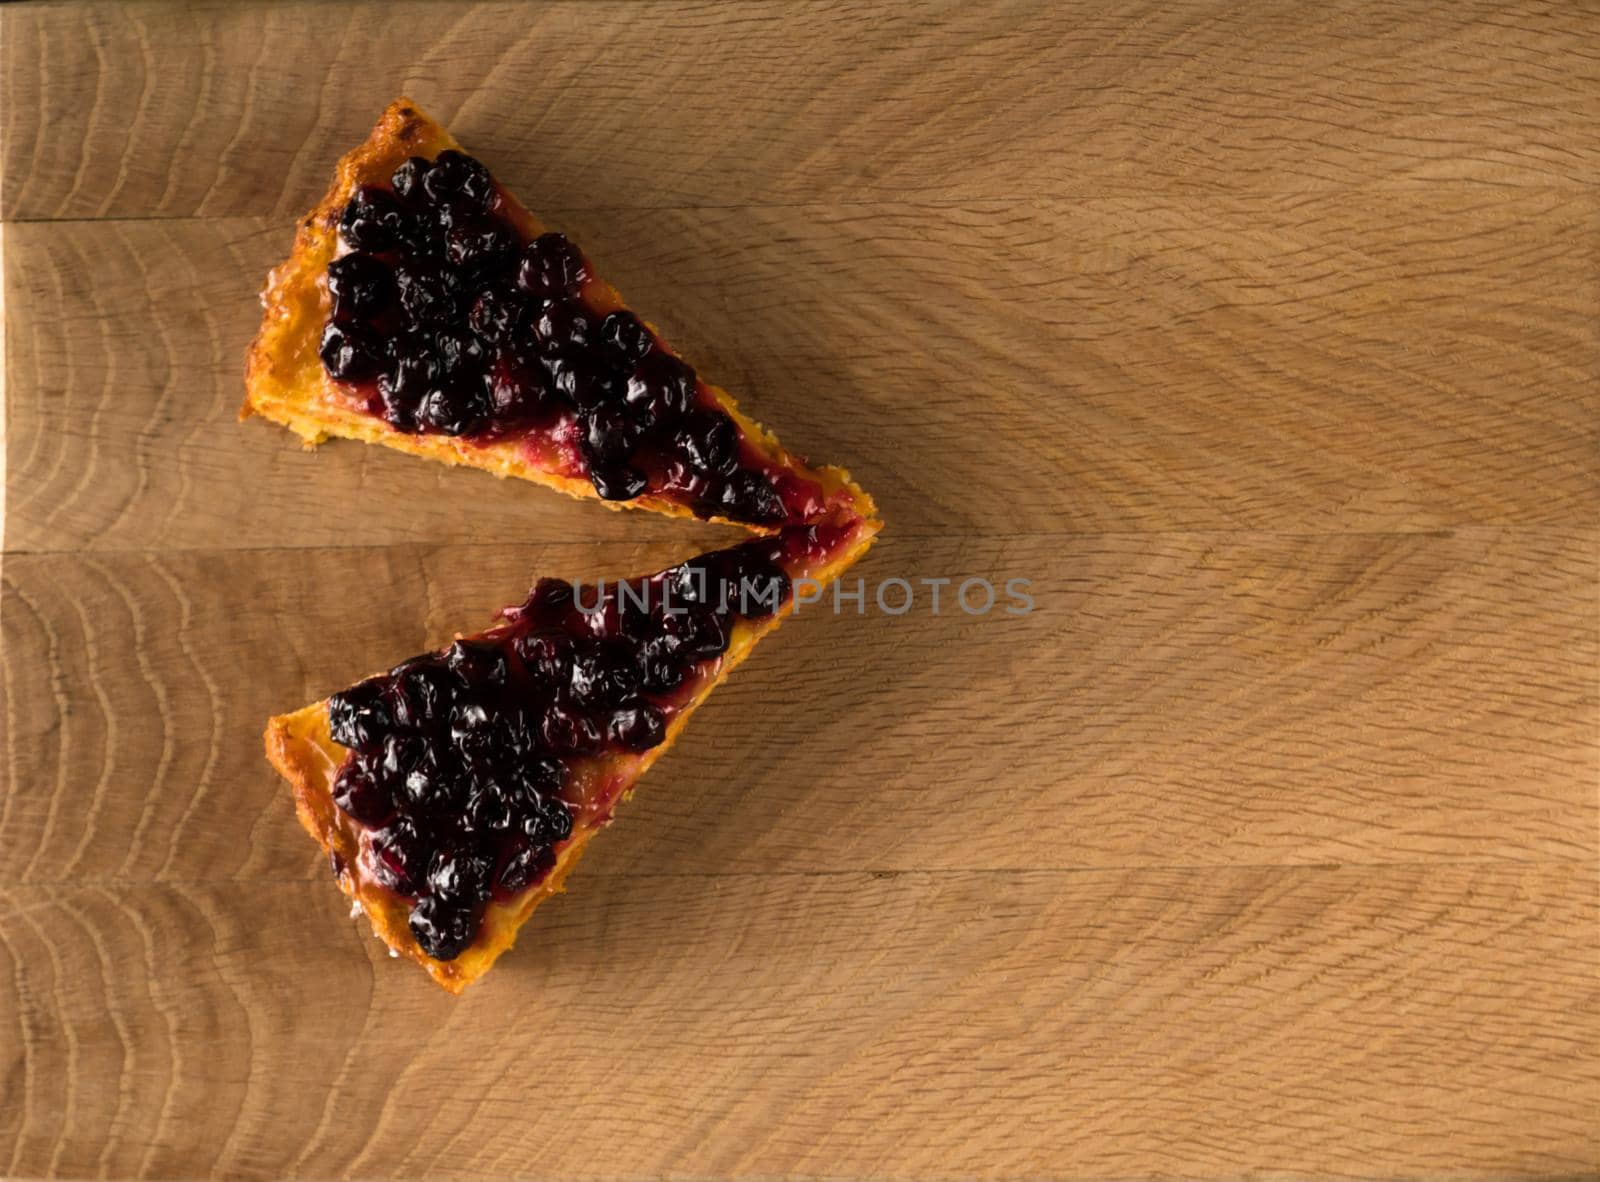 Two slices of carrot cake, thickly covered with currant berries on top, charlotte, on a wooden board